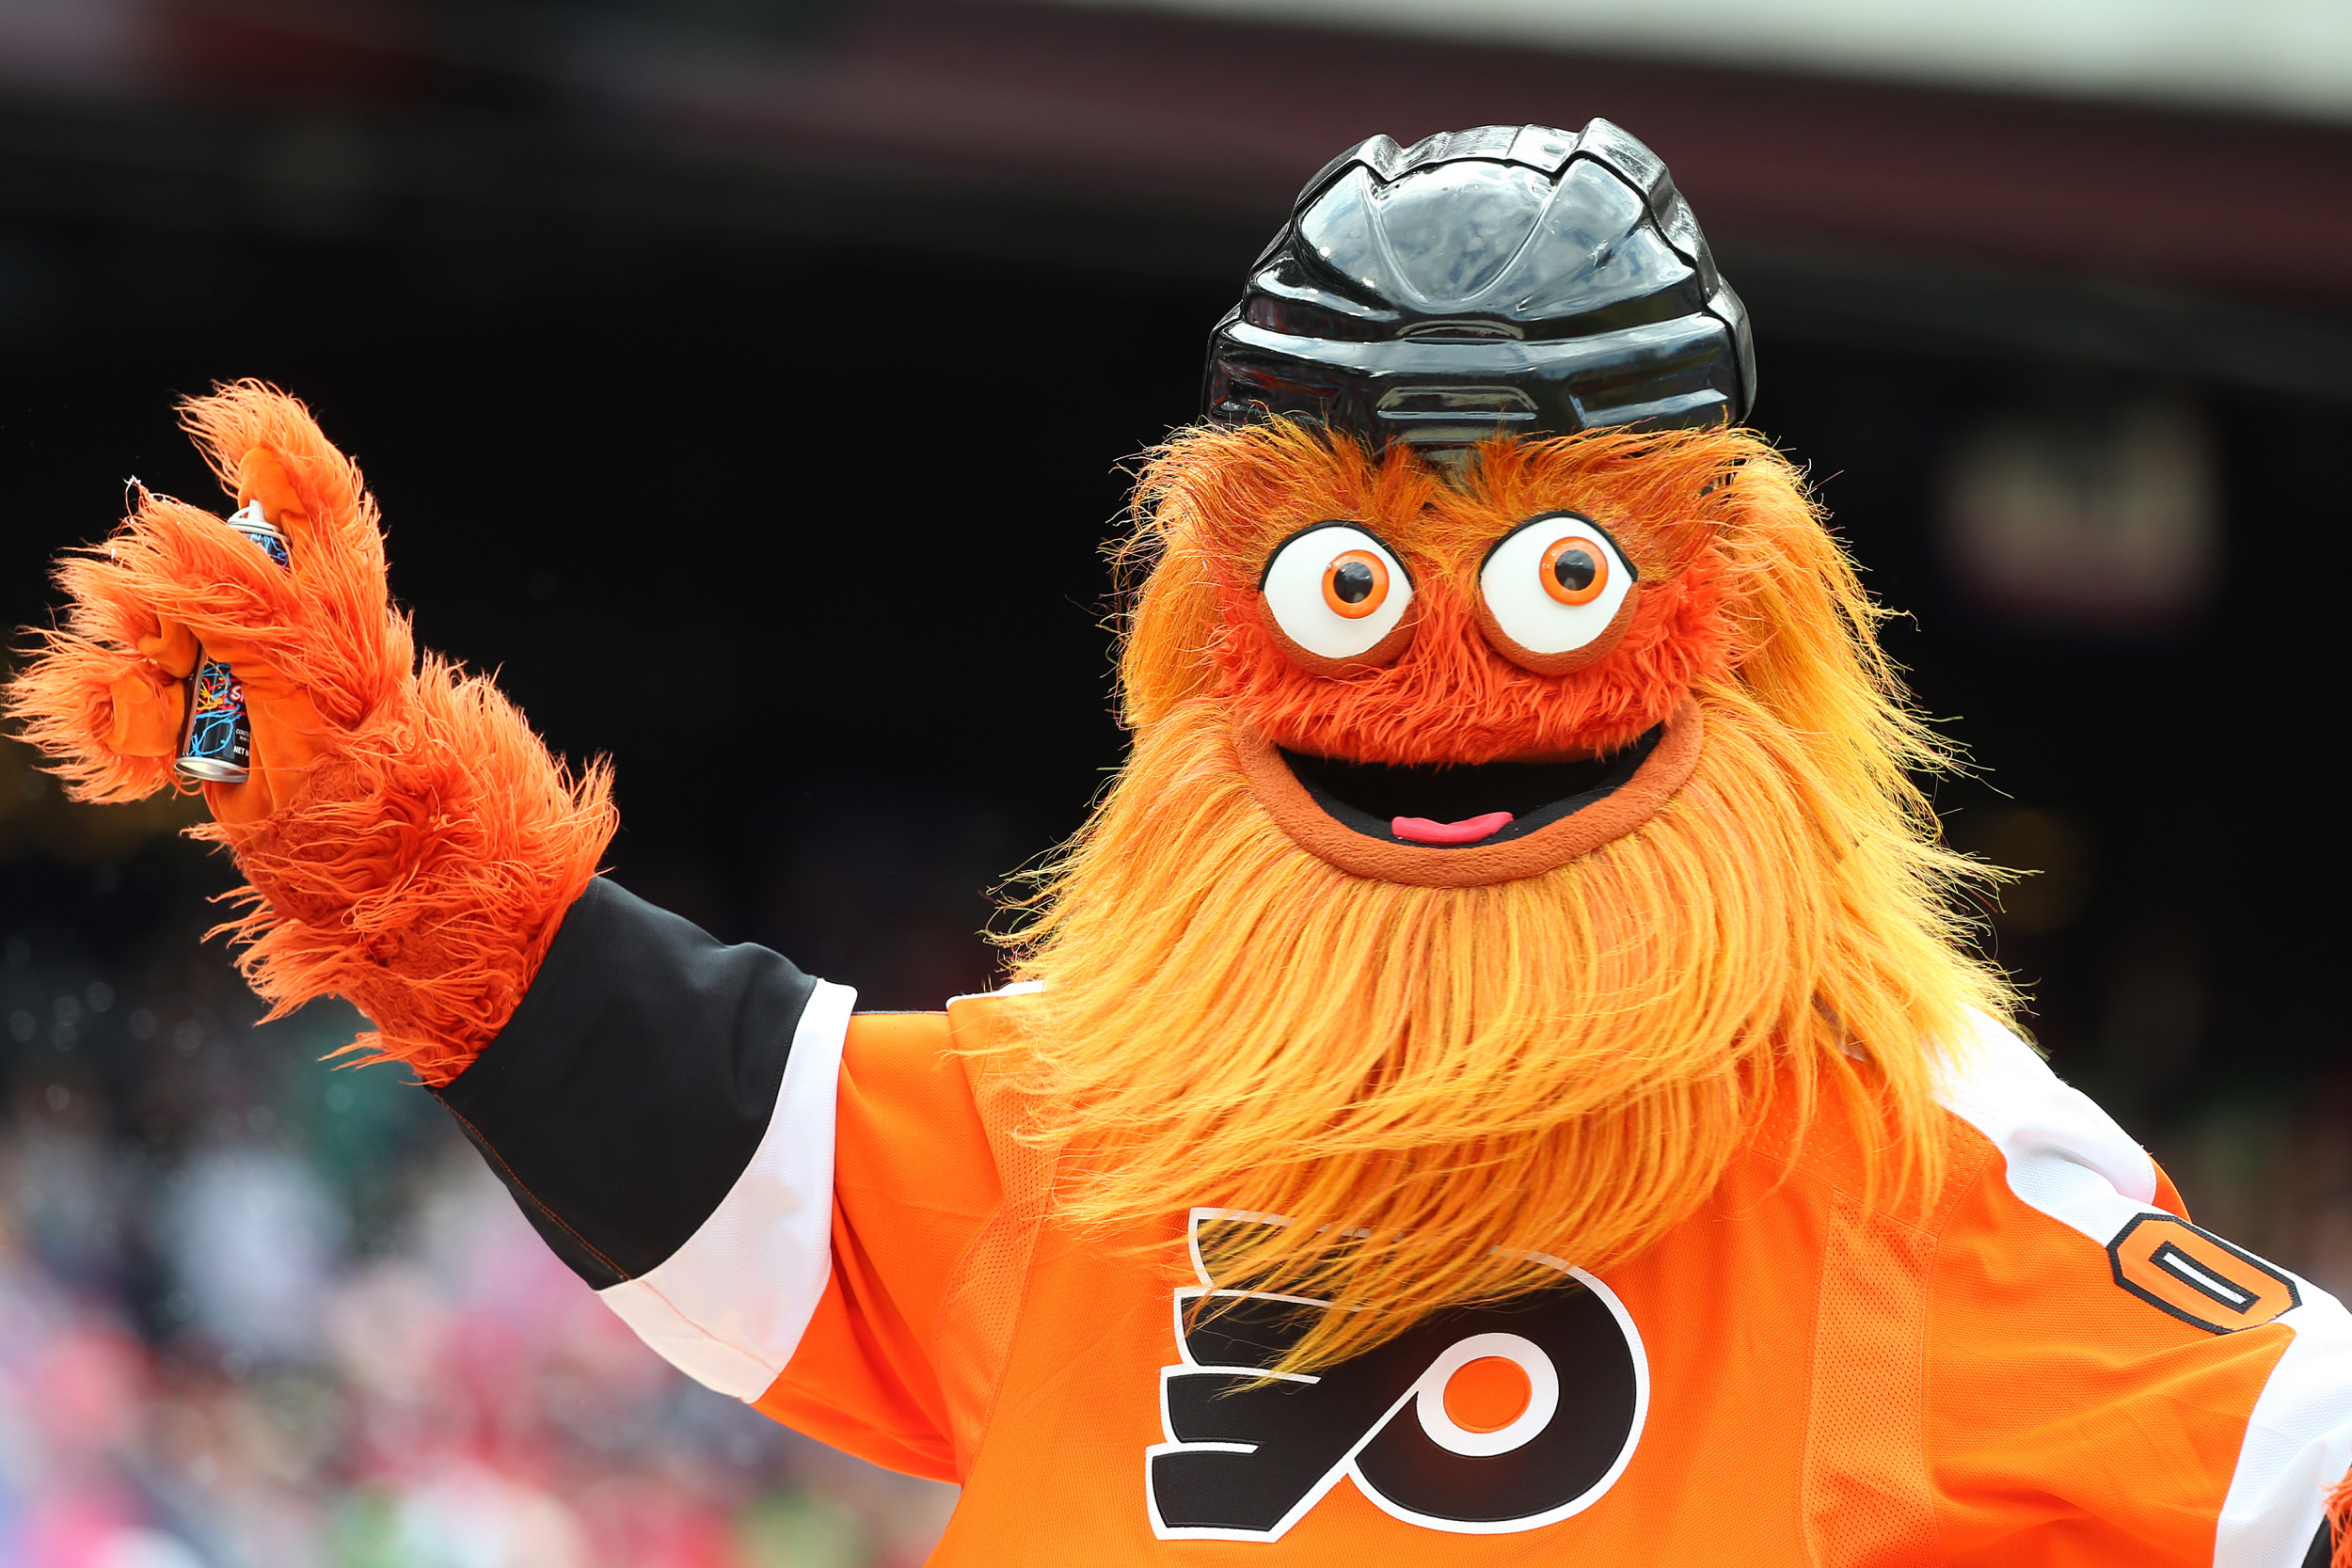 The Philly Flyers' Gritty Takes His Massive Paws to Twitter For a Heartfelt  Message